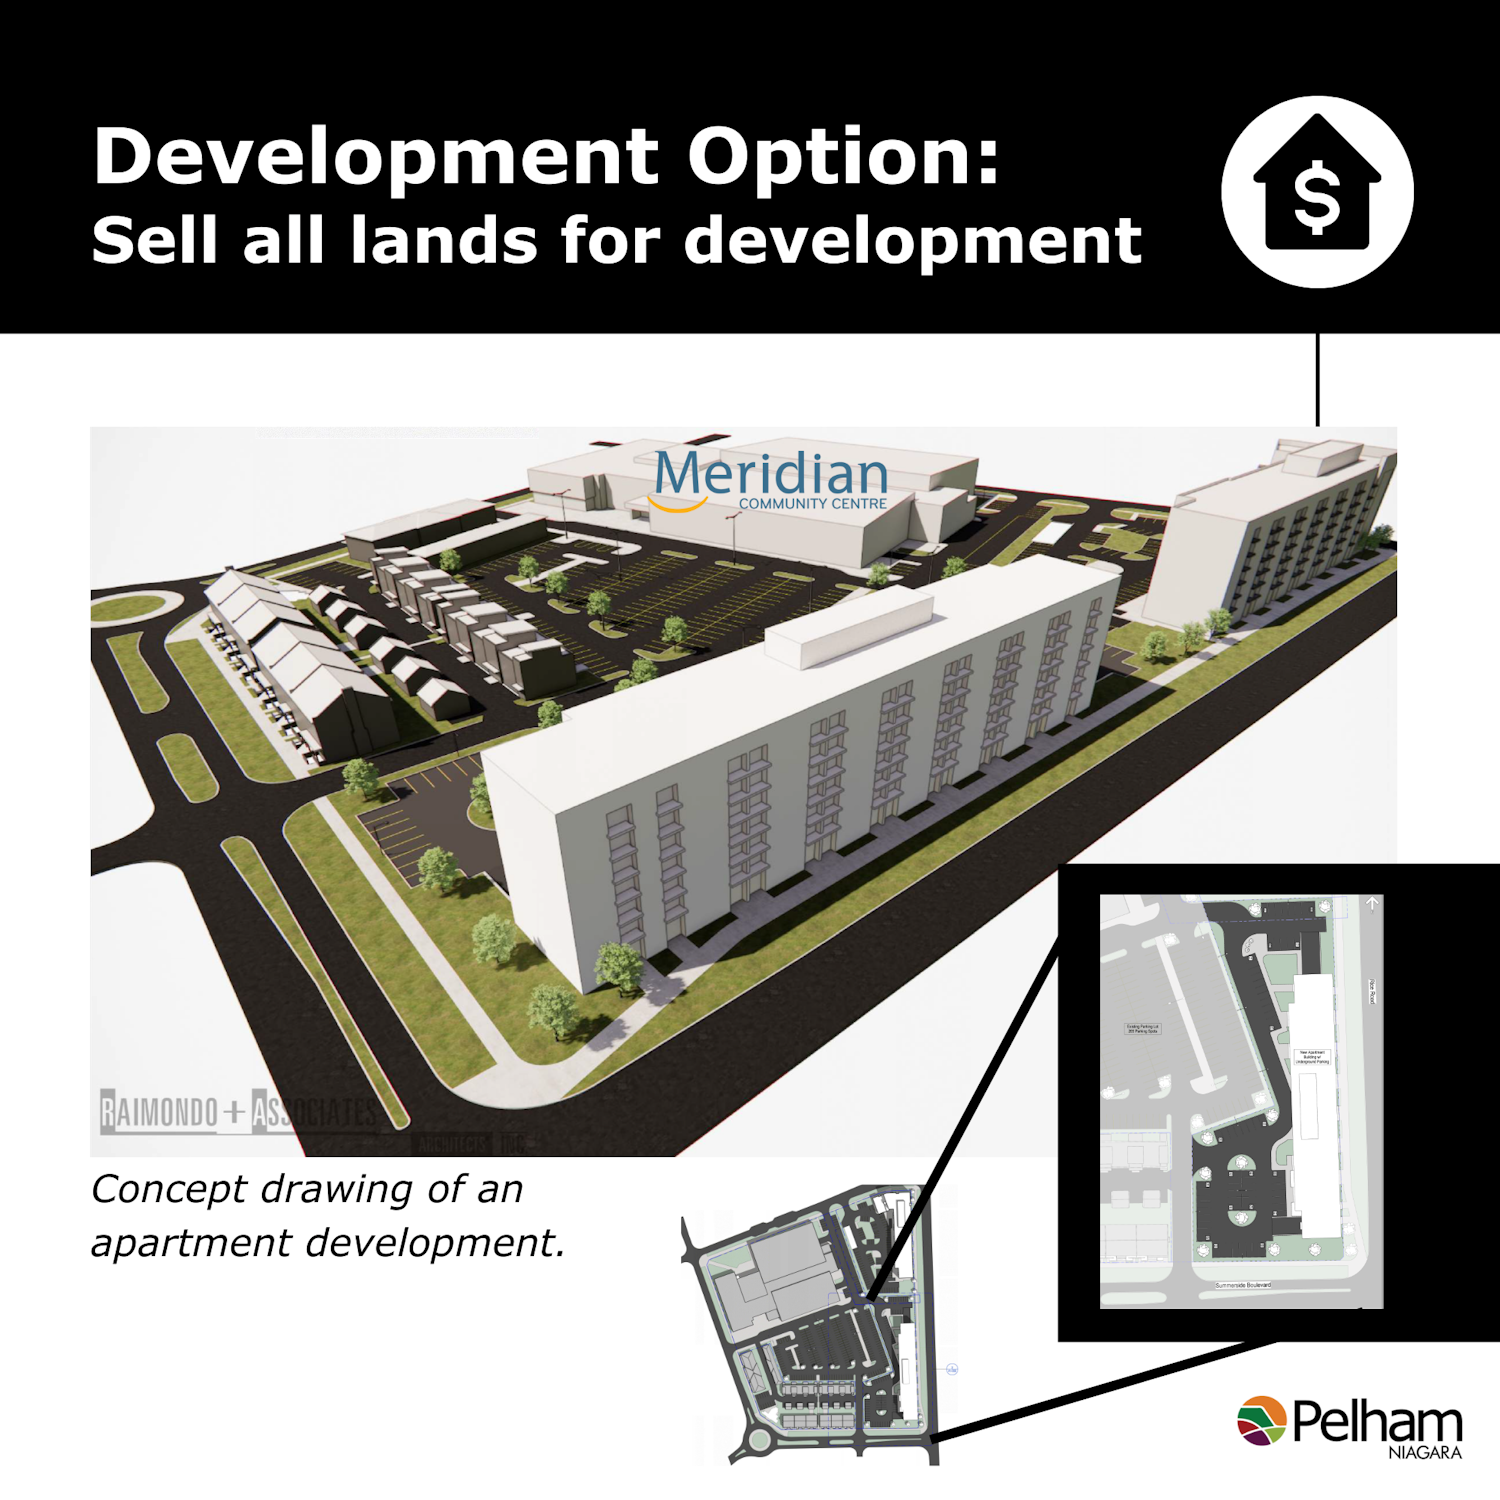 artist rendering of all lands adjacent to the Meridian Community Centre as a development with apartment building